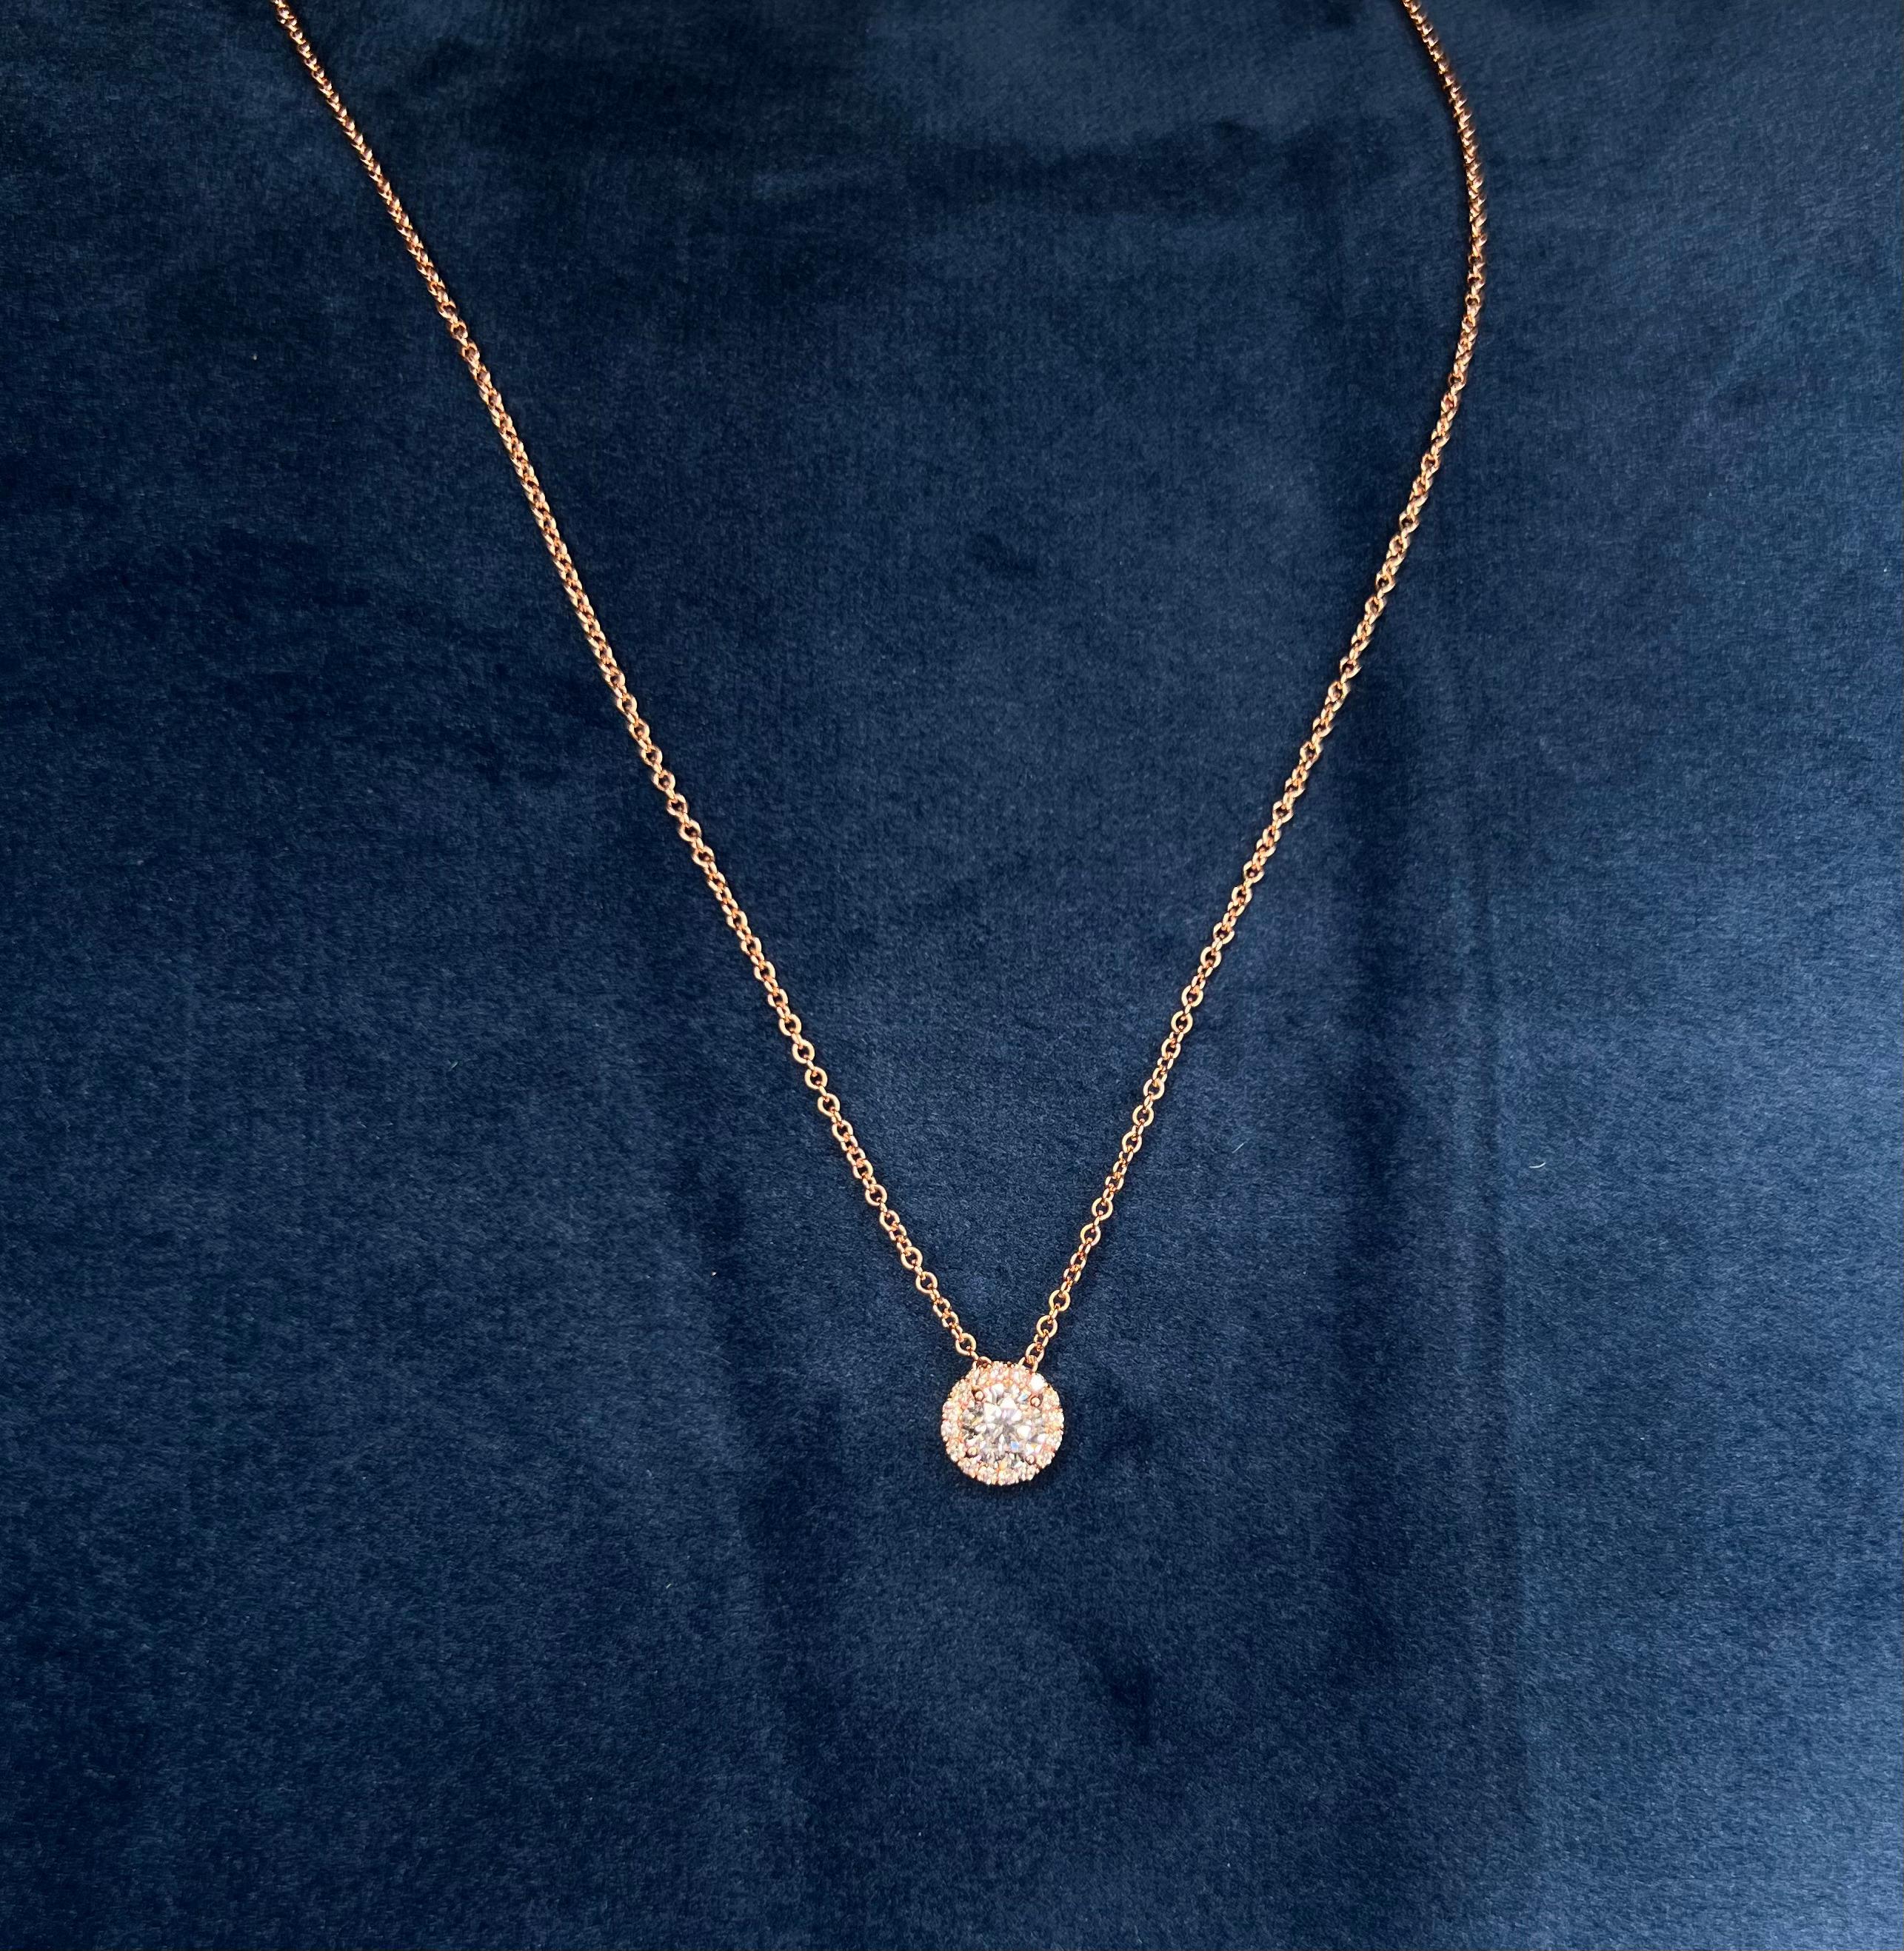 14k Yellow Gold 1.15 Carat Round Cut Diamond Solitaire Pendant Necklace In New Condition For Sale In Los Angeles, CA